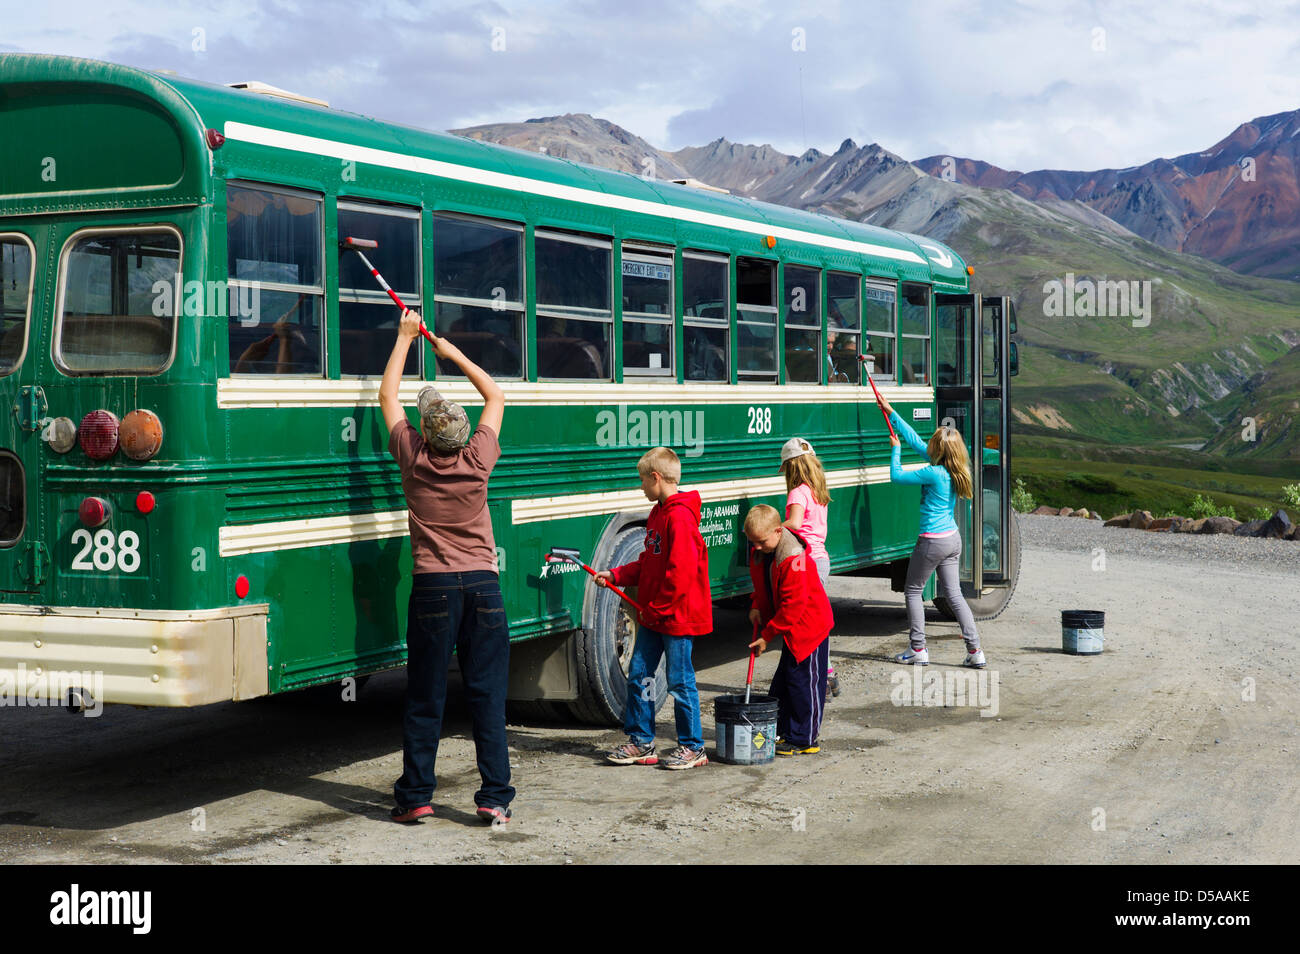 Young park visitors help clean the dust from the shuttle bus windows, Eielson Visitor Center, Denali National Park, Alaska, USA Stock Photo